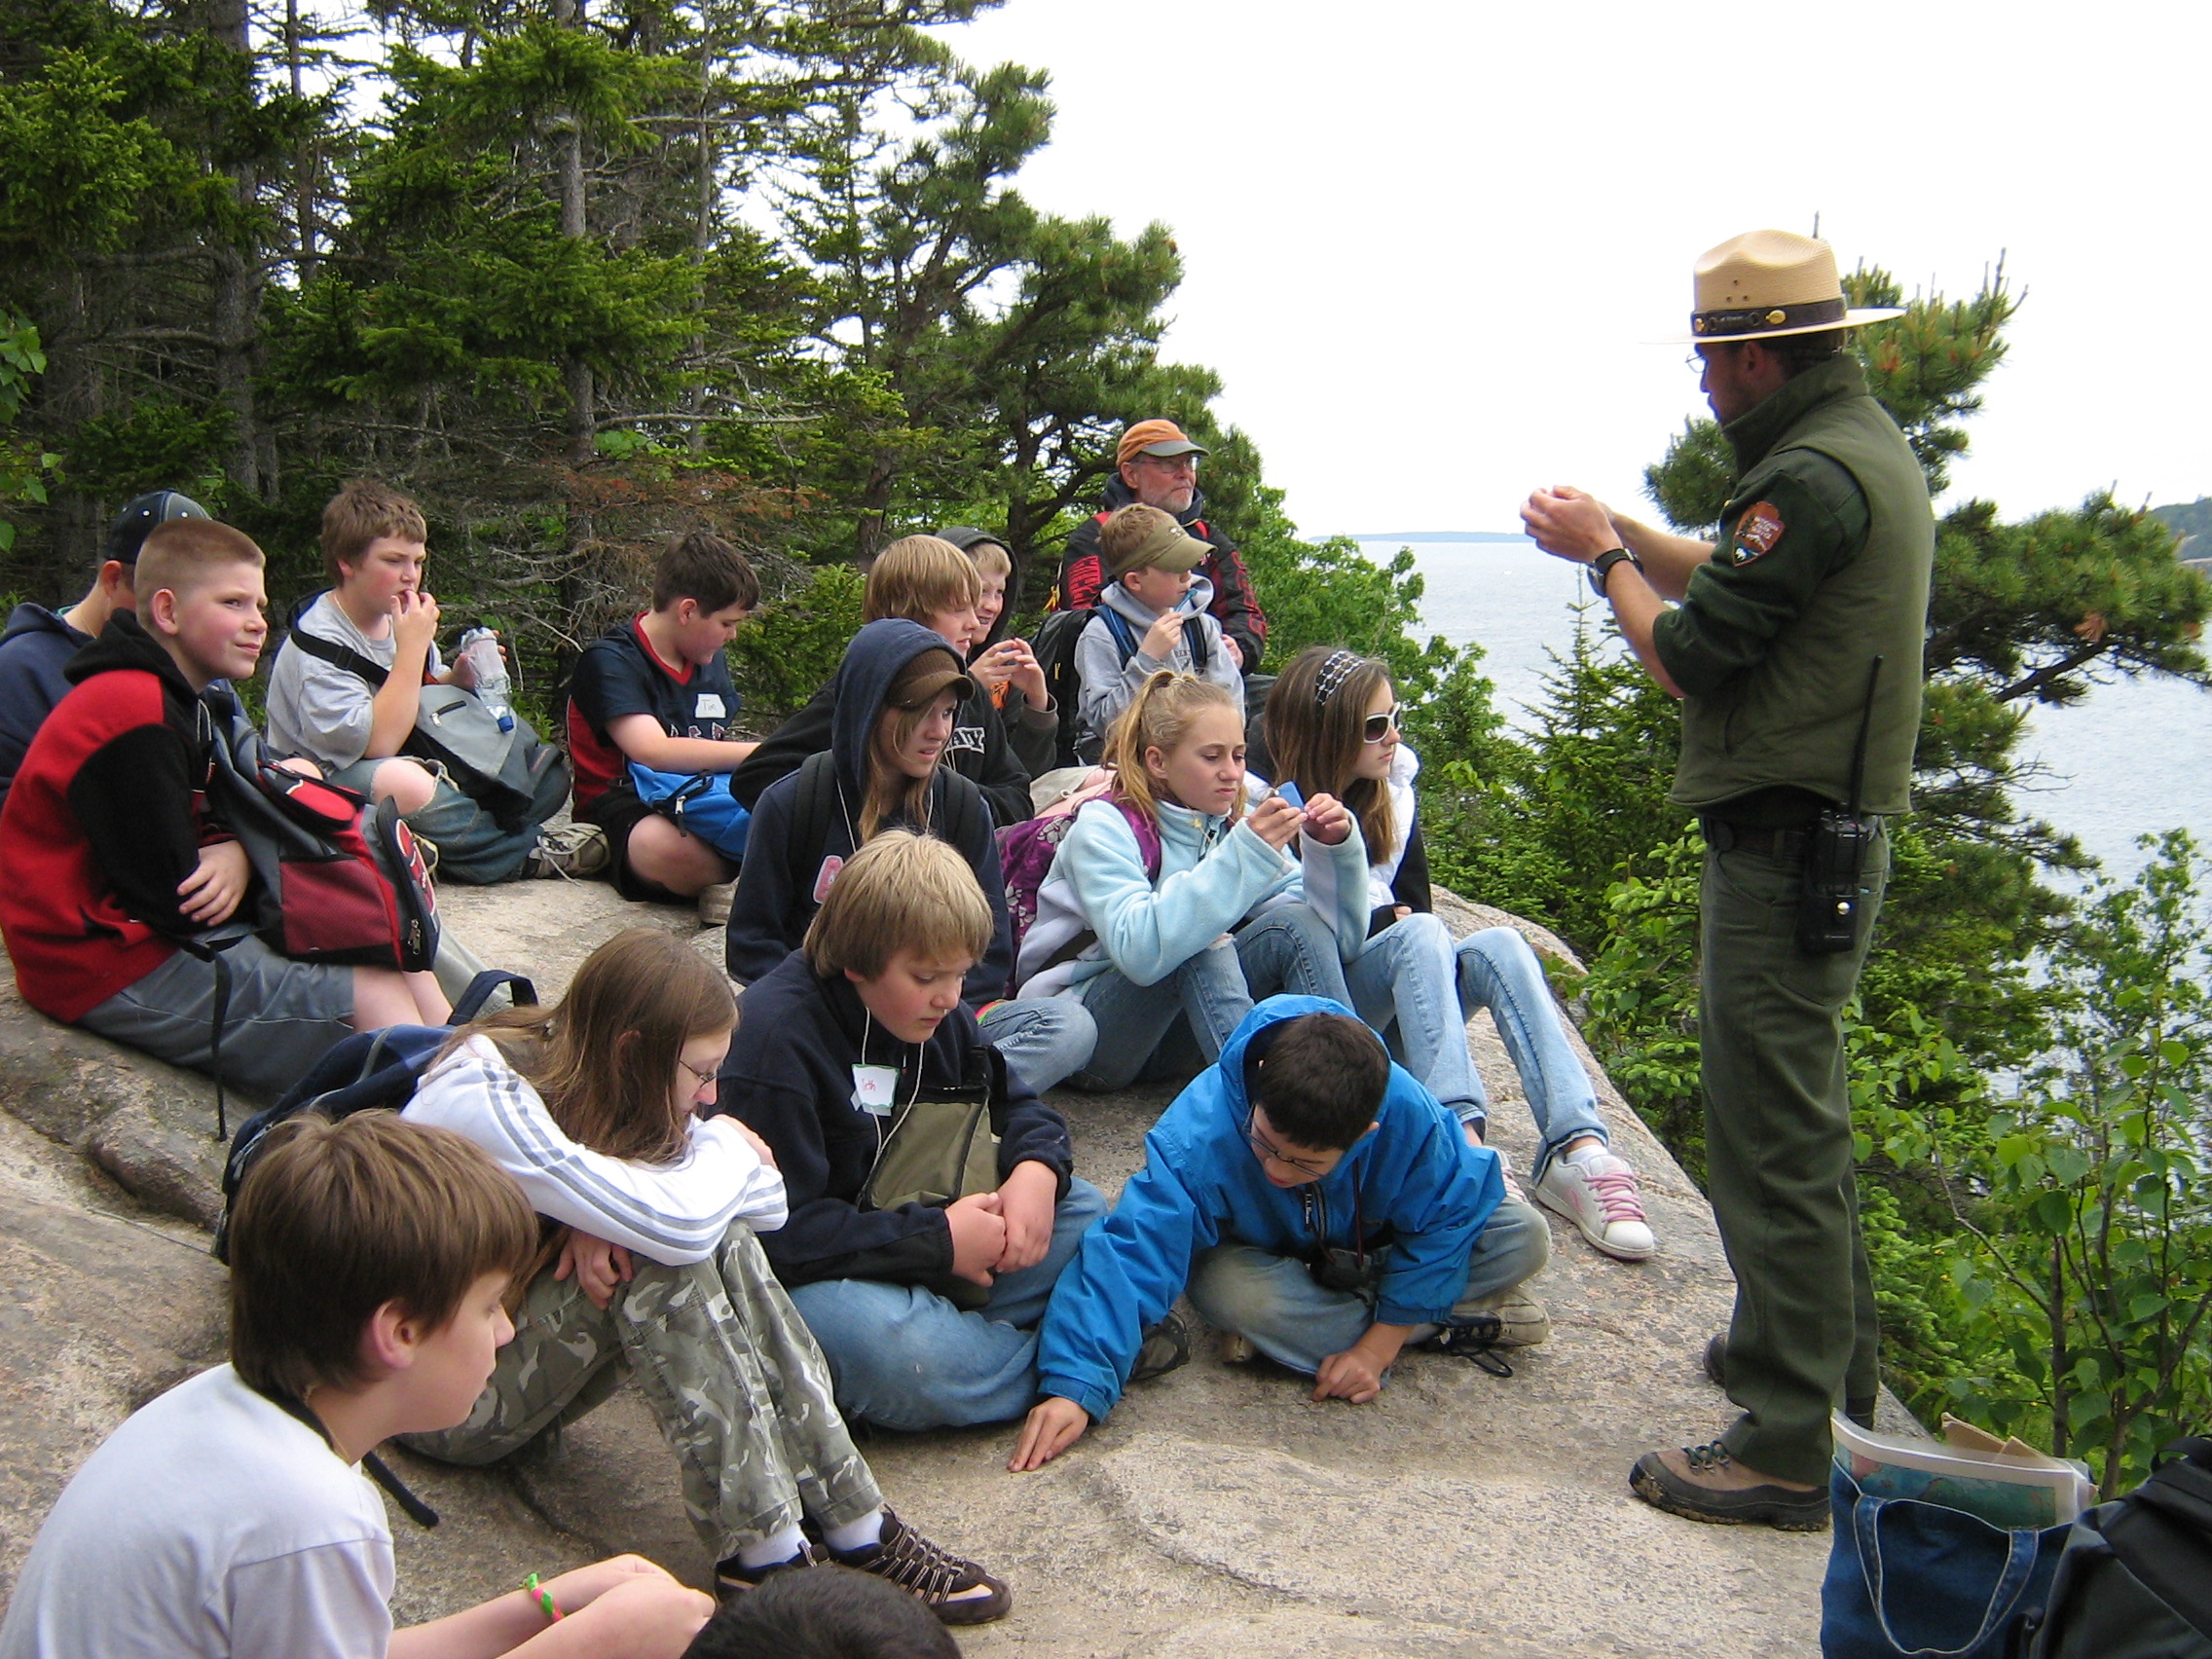 Ranger stands on rock ledge with students sitting nearby.